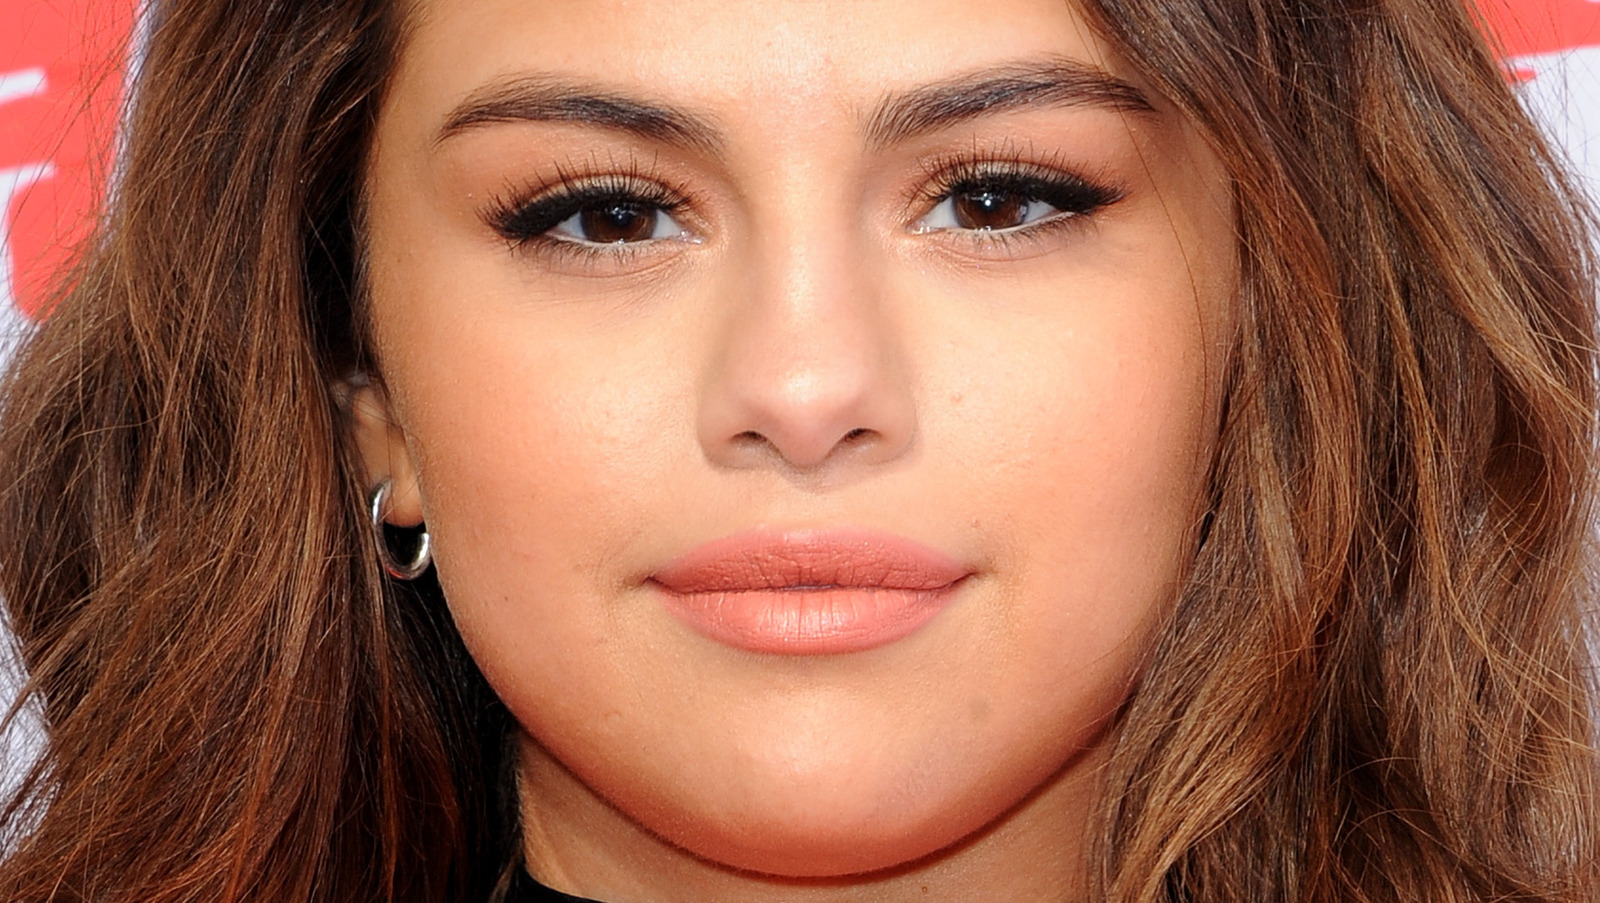 10 Essential Selena Gomez Facts Every Fan Should Know